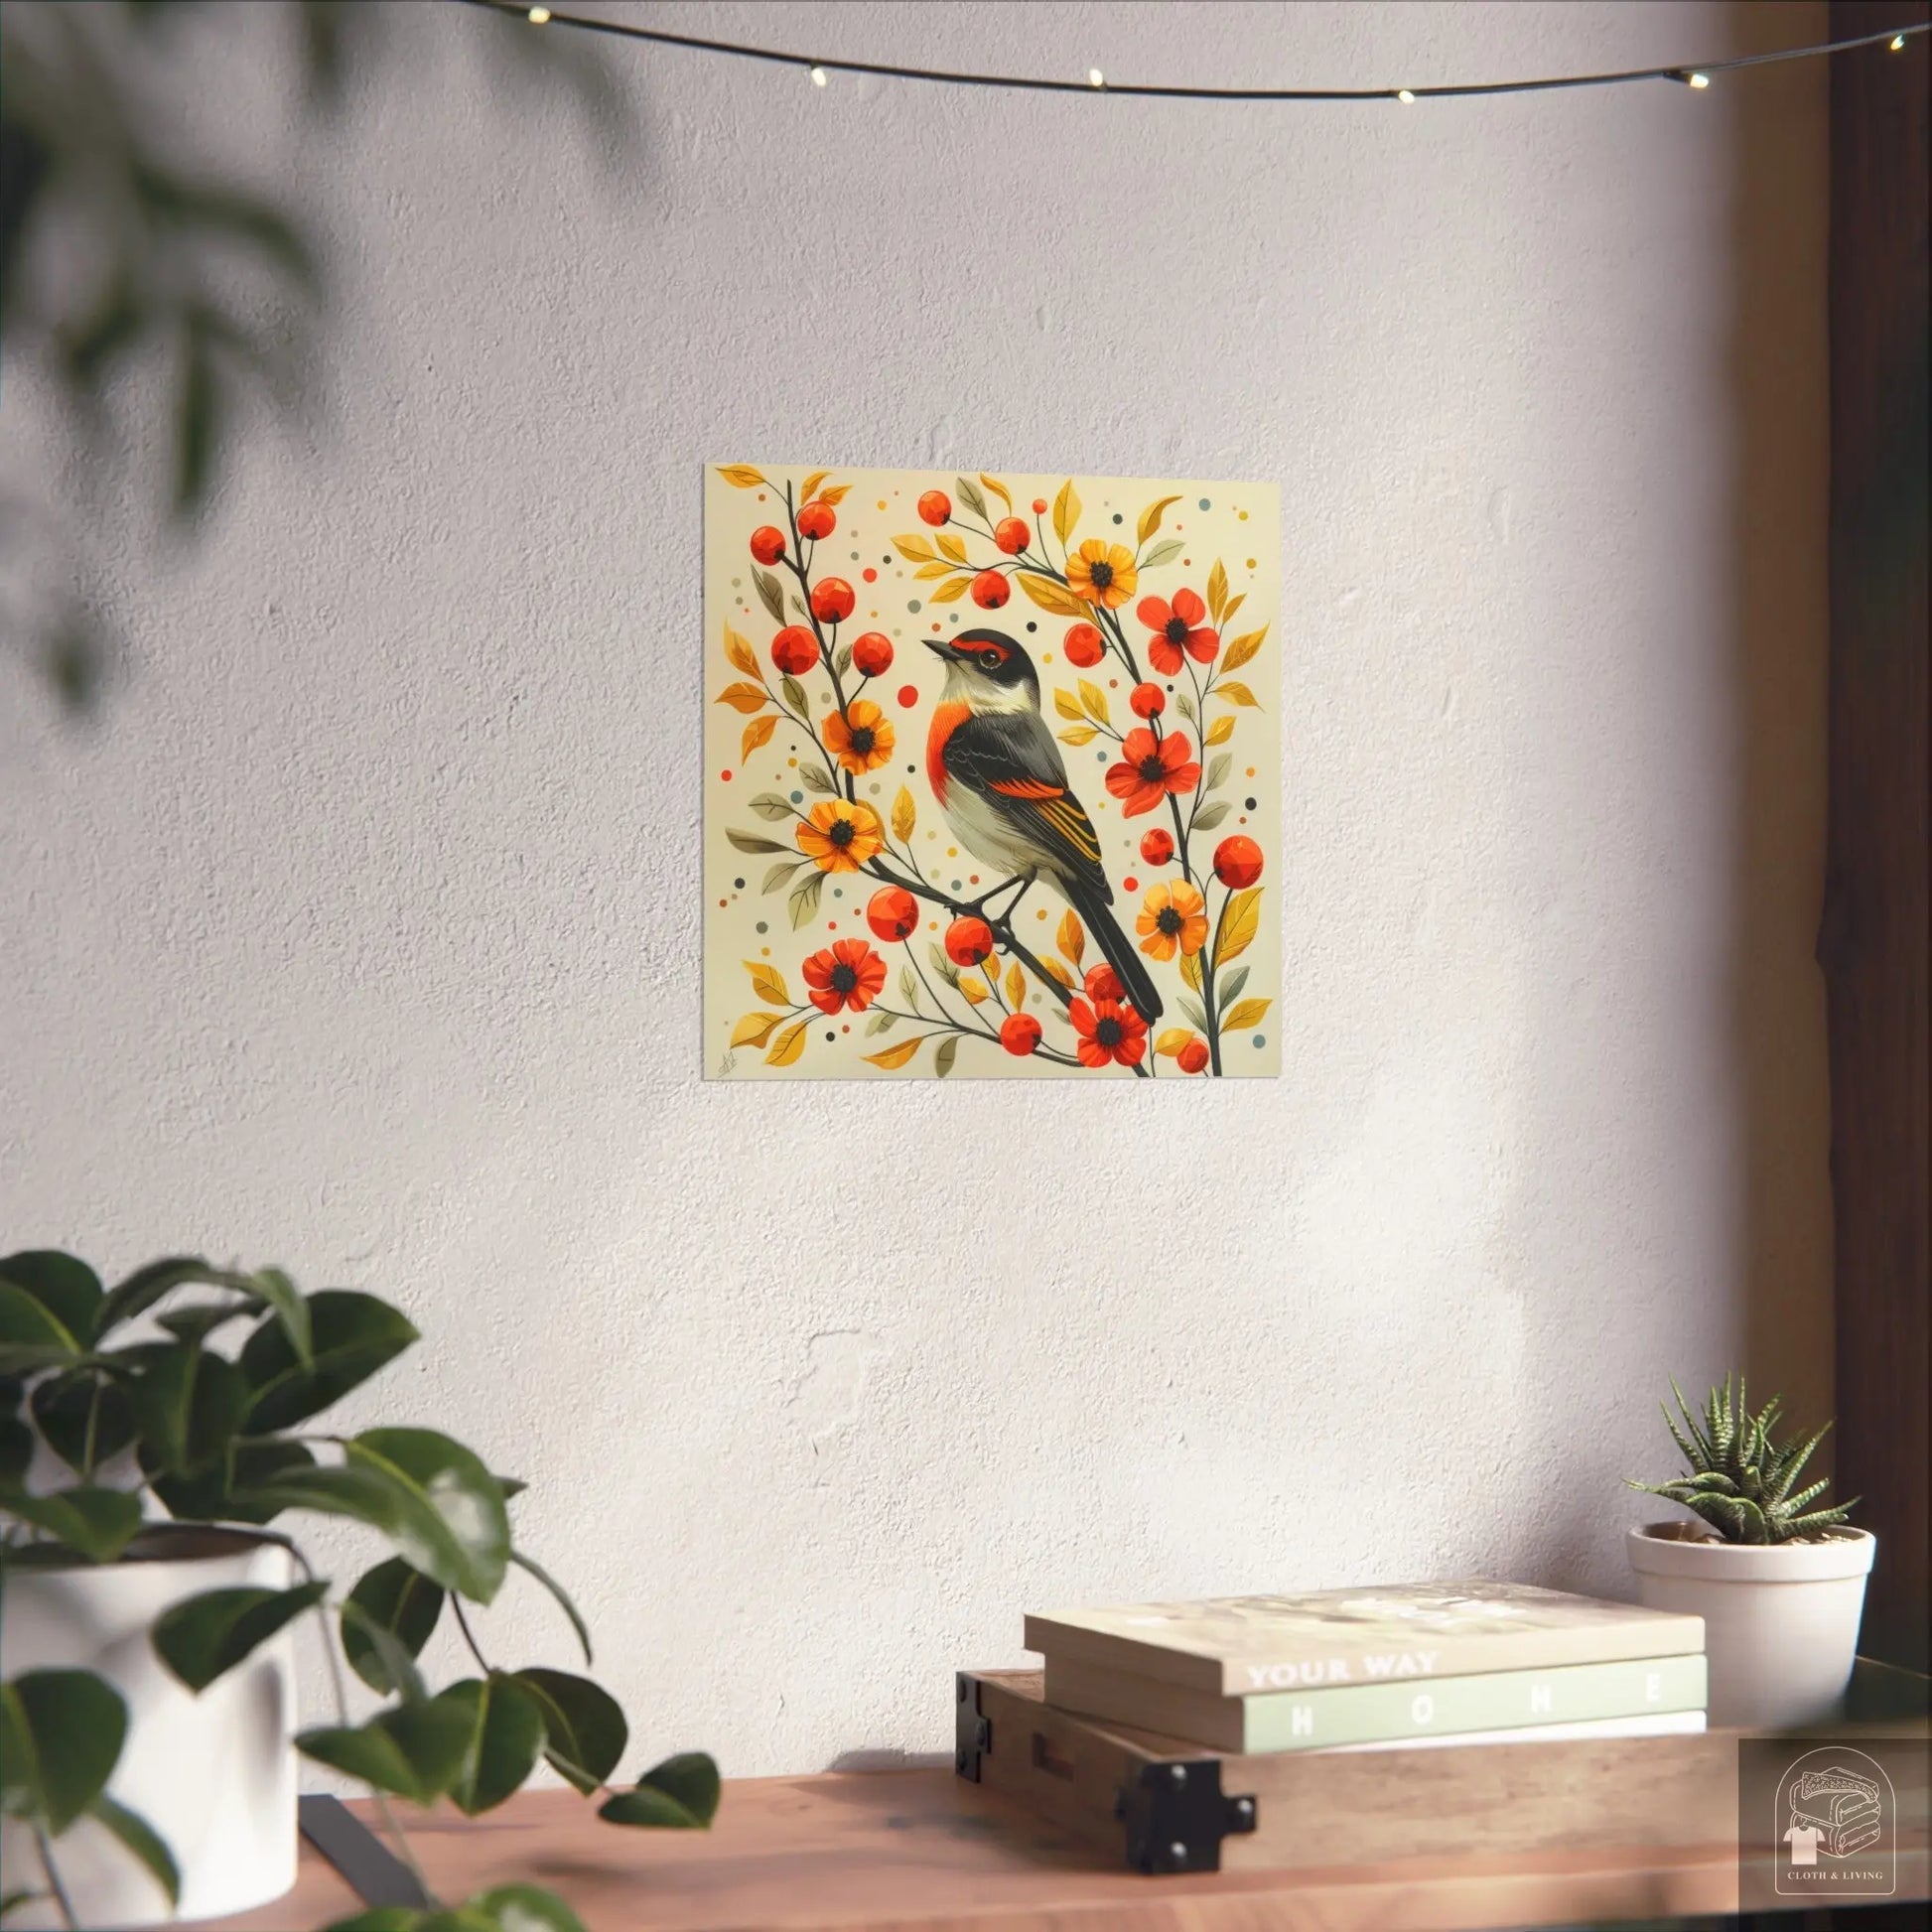 Autumn Serenade - Nature's Symphony Poster (Available in various sizes) -   Cloth & Living